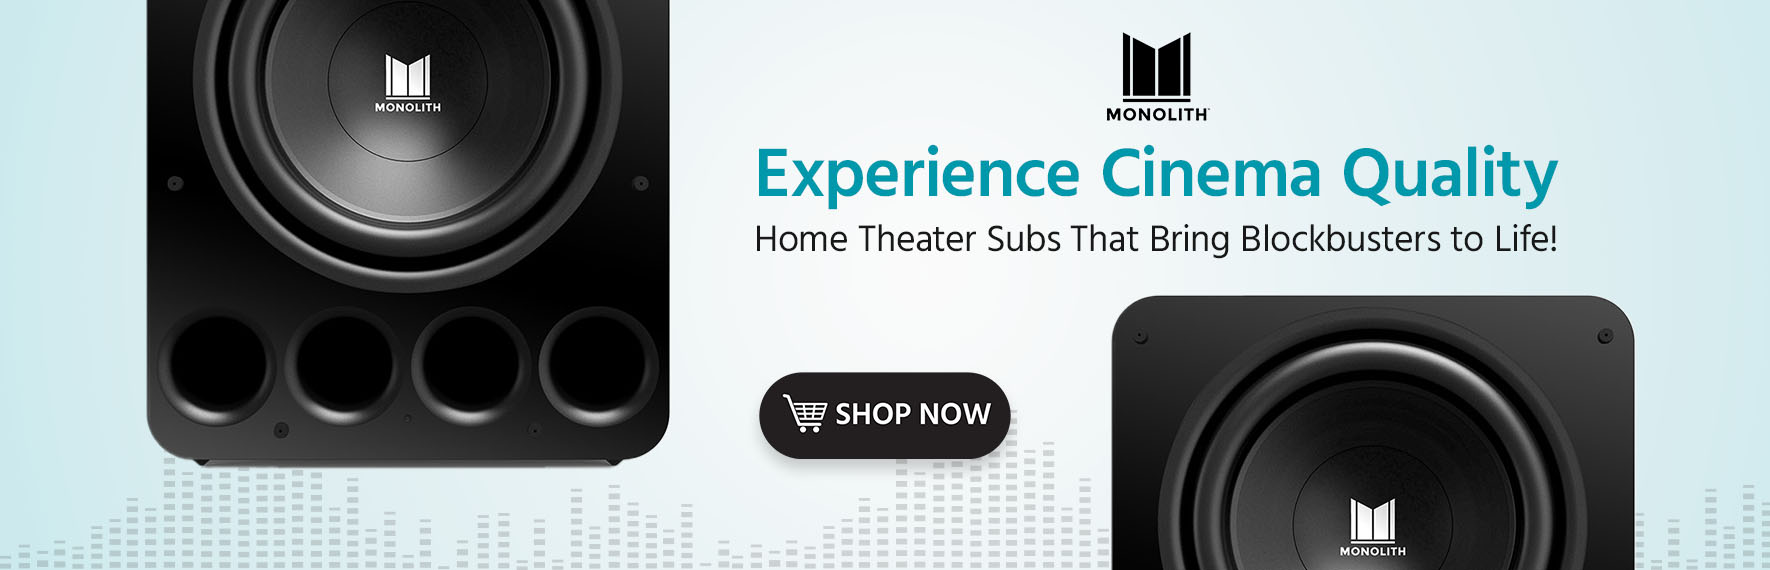 Experience Cinema Quality: Home Theater Subs That Bring Blockbusters to Life! Shop Now